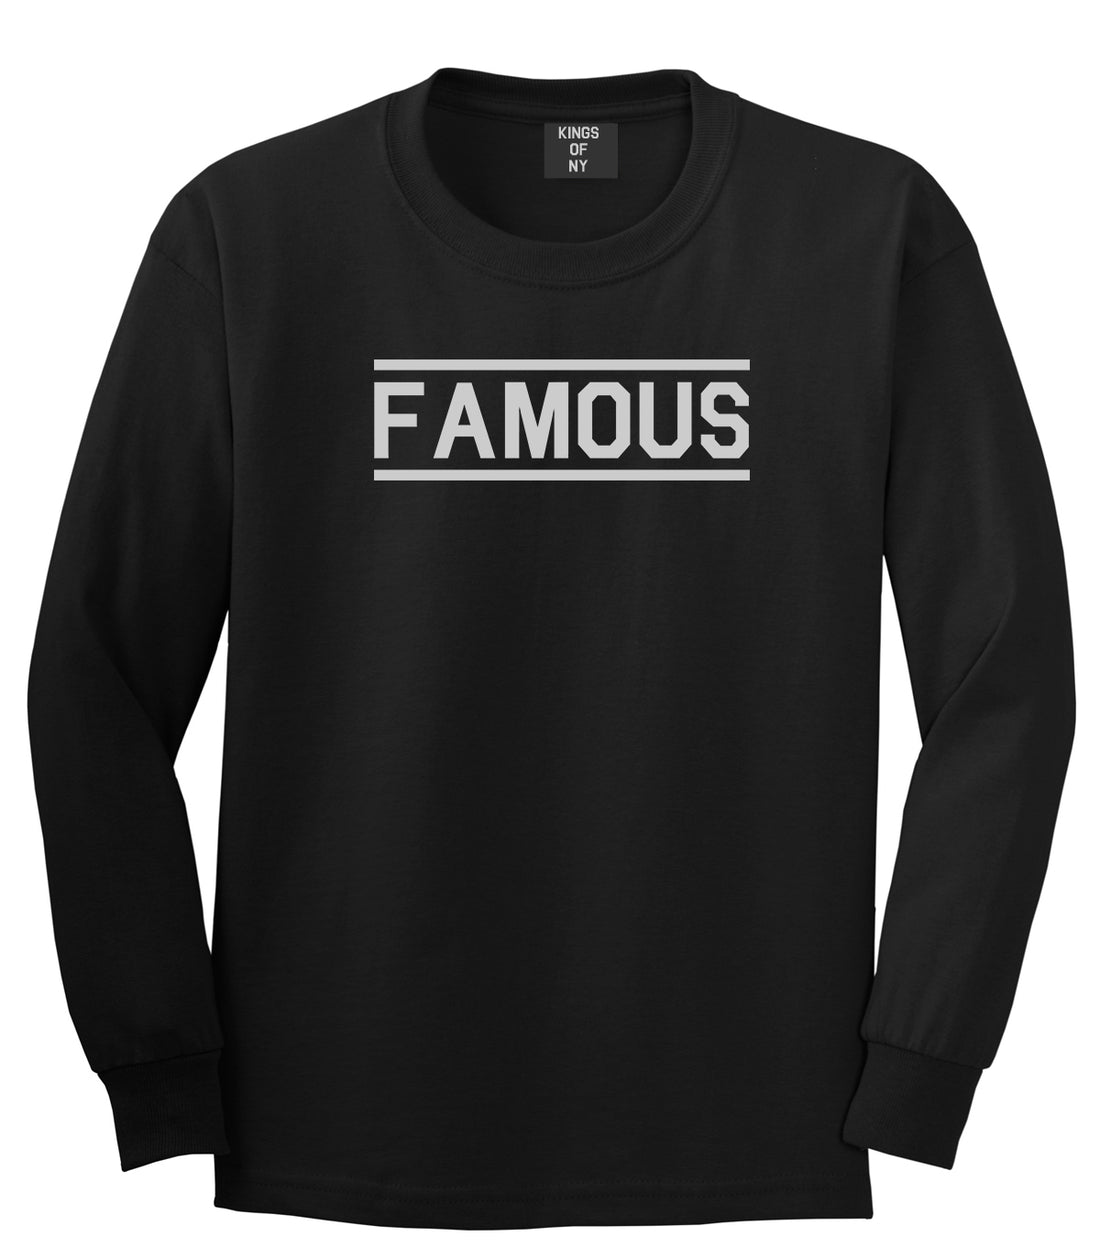 Famous Mens Black Long Sleeve T-Shirt by KINGS OF NY